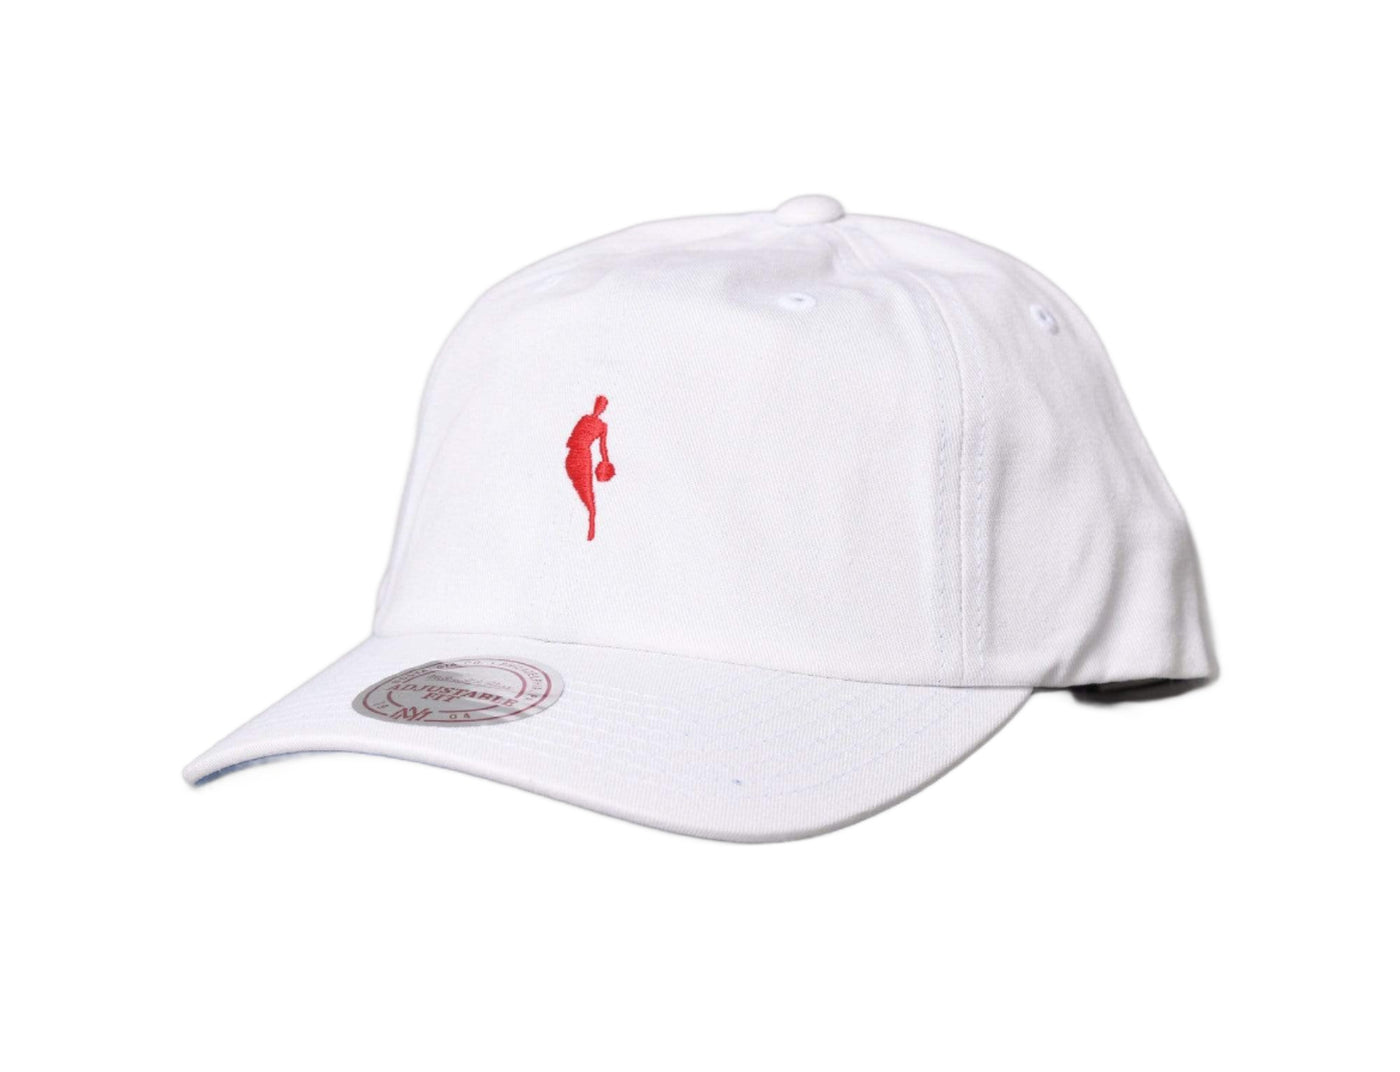 Cap Adjustable Little Dribbler Dad Hat NBA White/red Mitchell & Ness Adjustable Cap / White / One Size